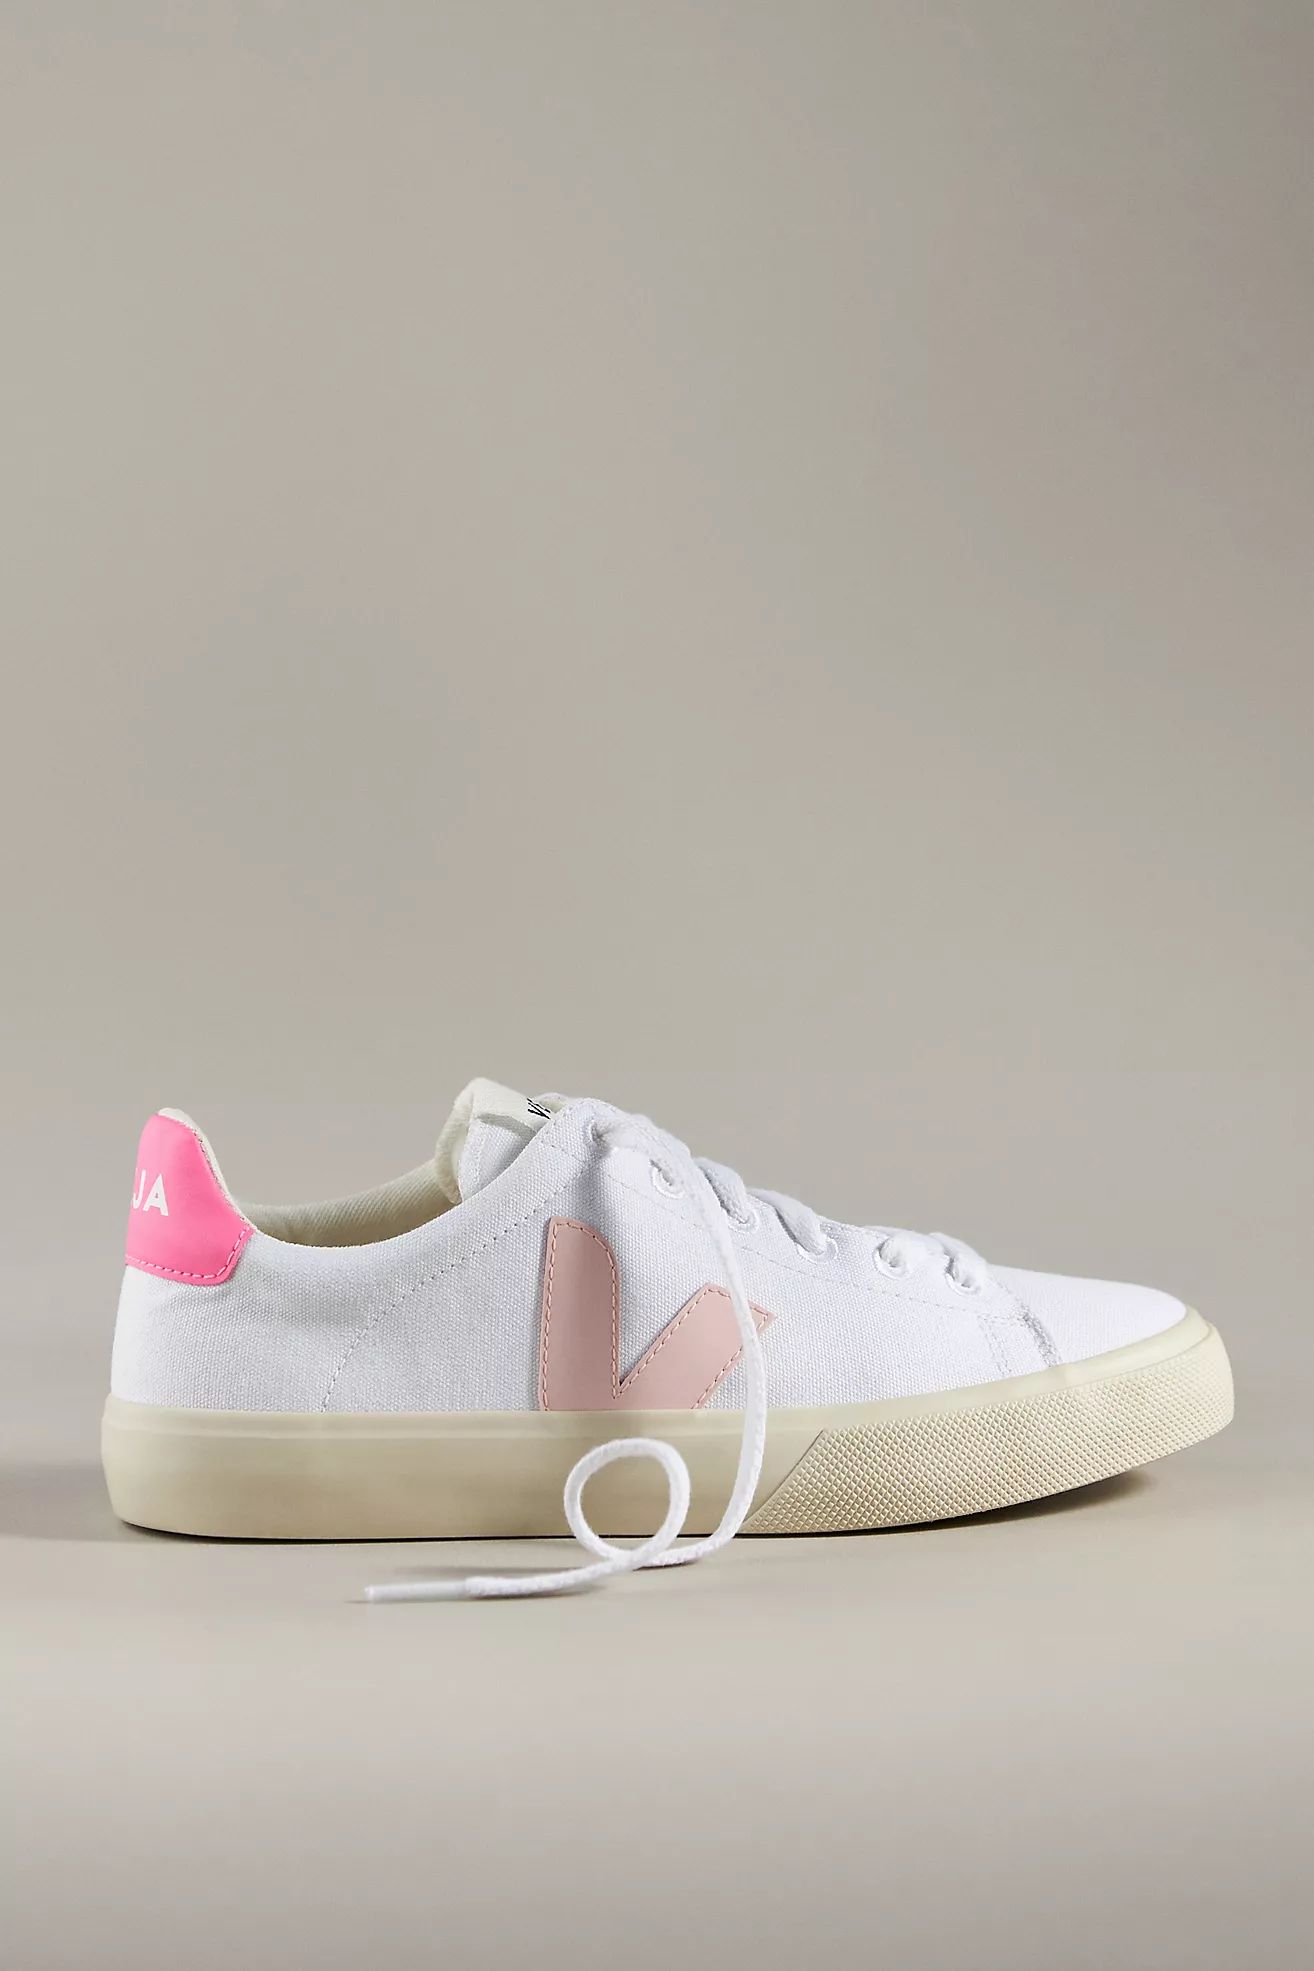 Veja Campo Canvas Sneakers | Anthropologie (US)